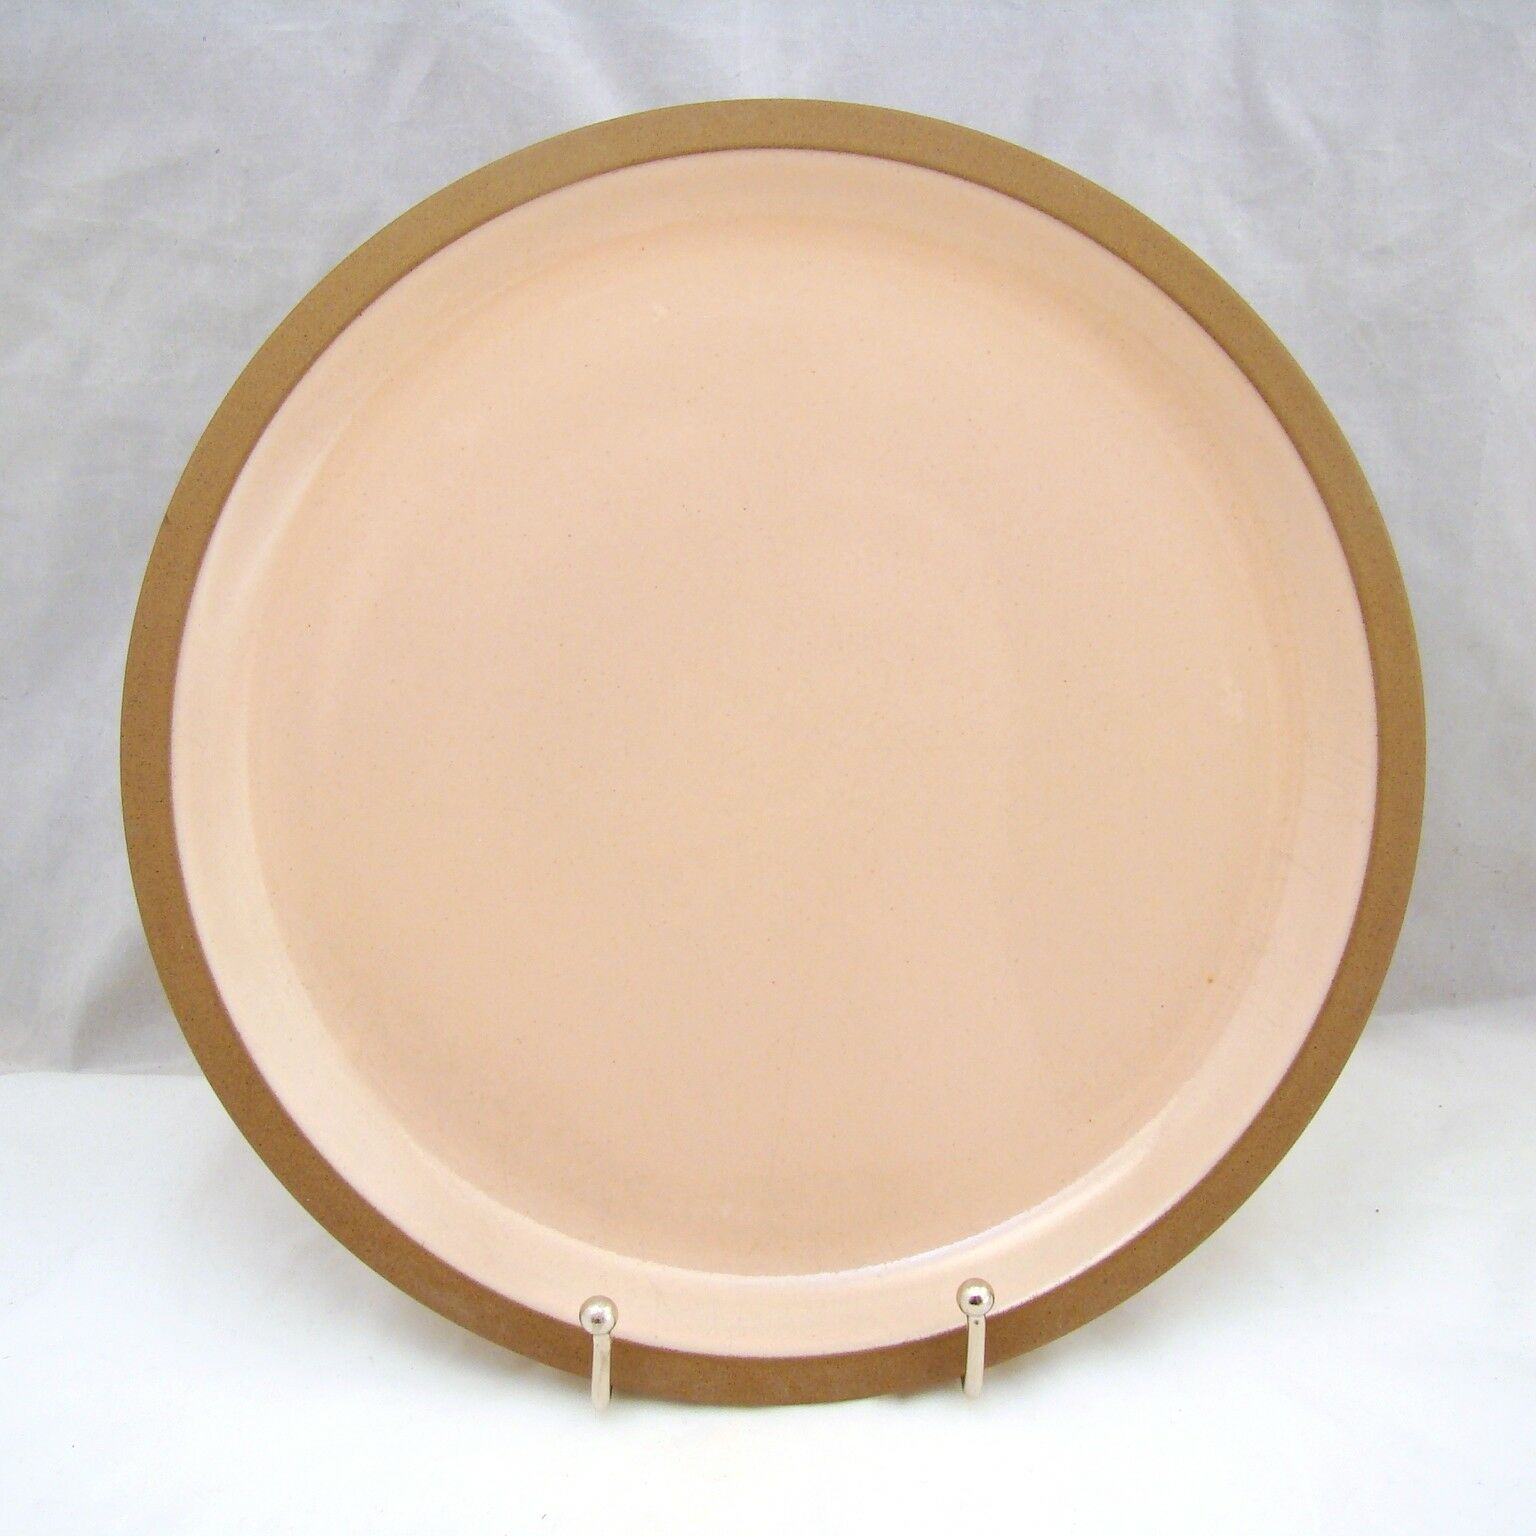 Midwinter Coral Sand Dinner Plate 10 3/4"